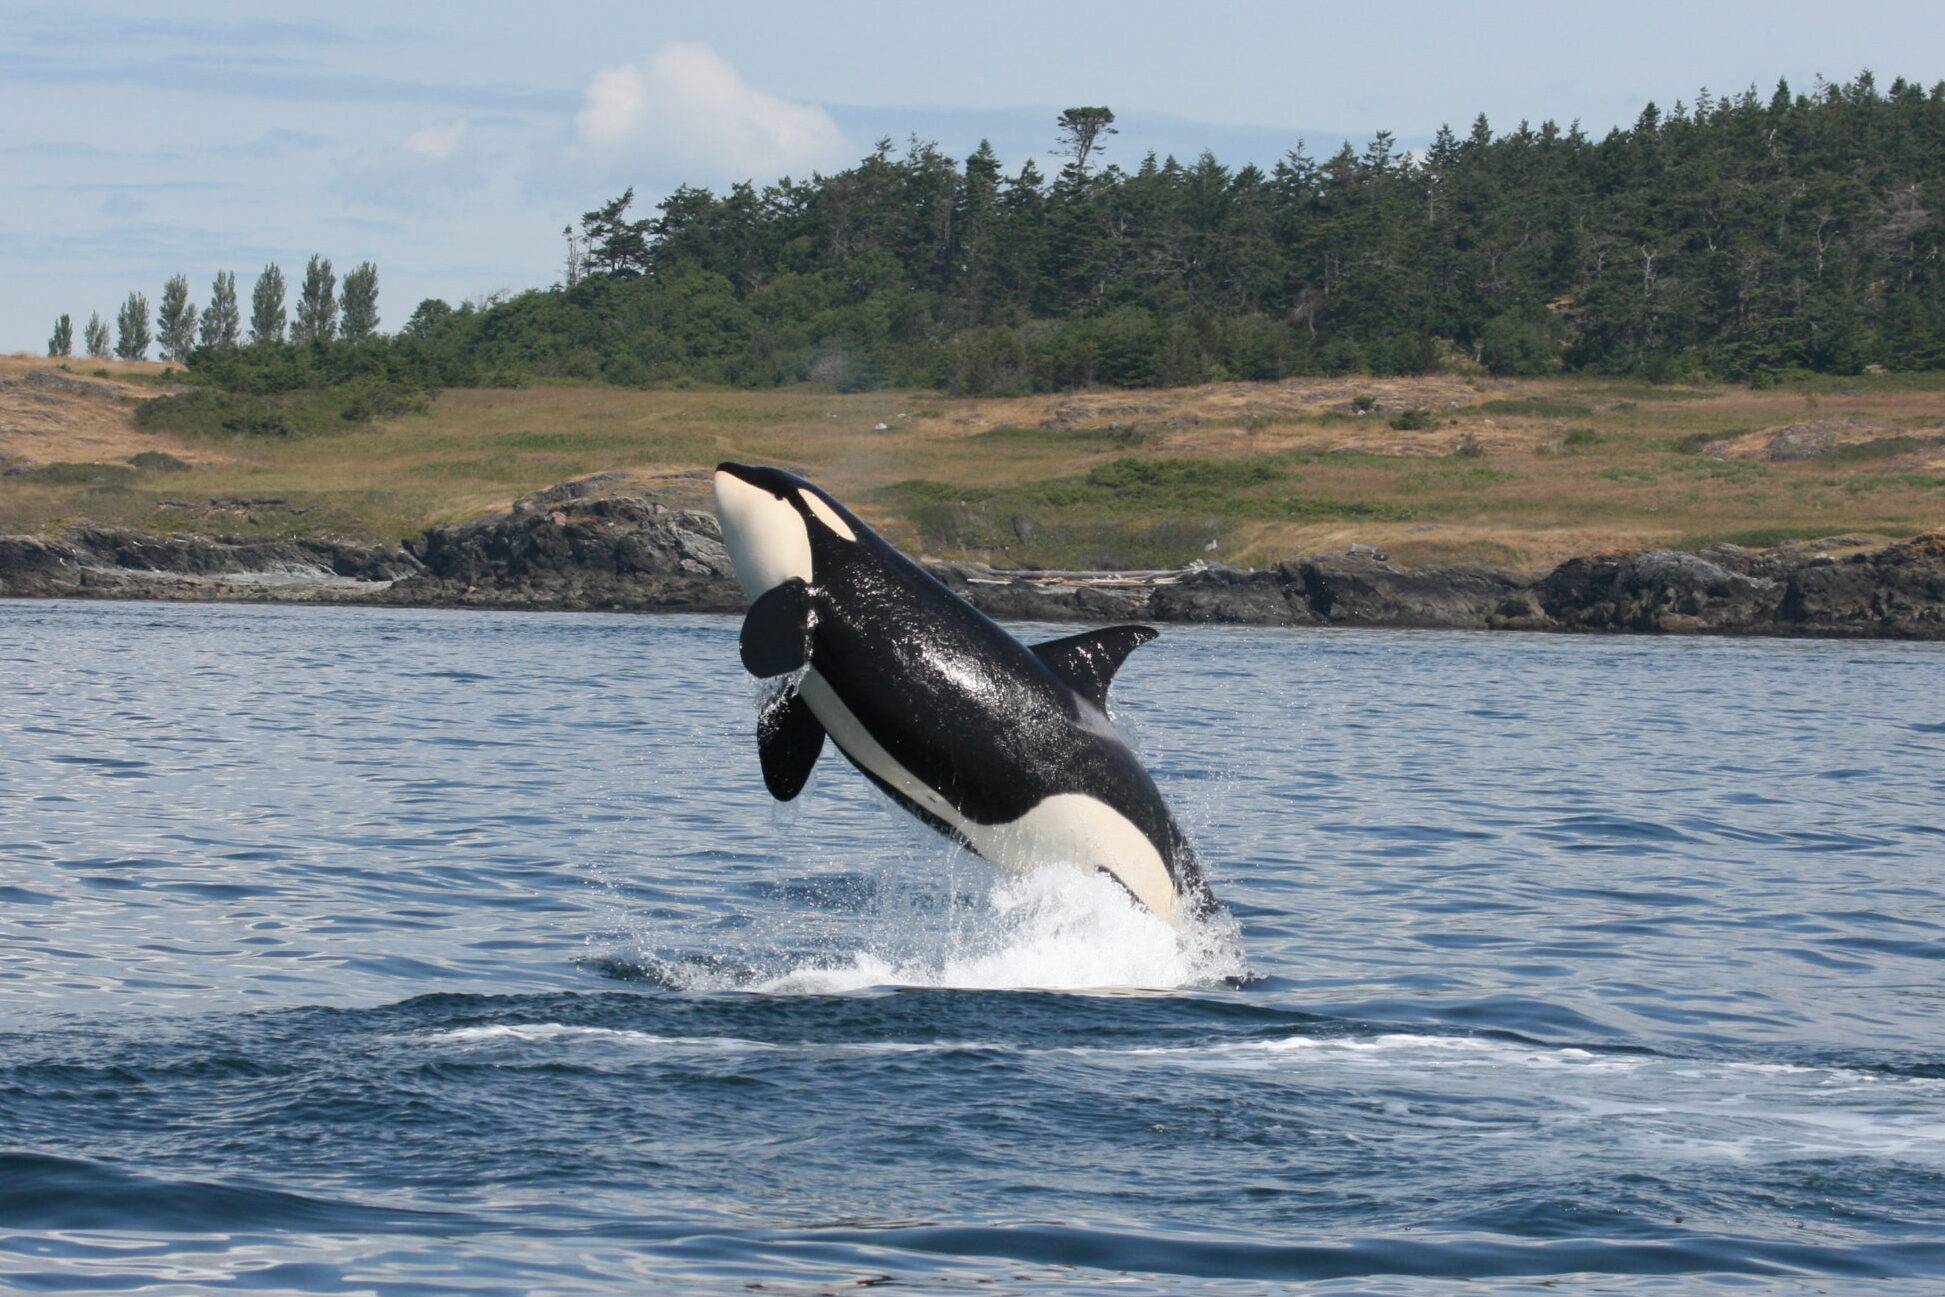 A southern resident Killer whale (Orcinus orca) leaping out of the waters of Haro Strait, British Columbia, Canada